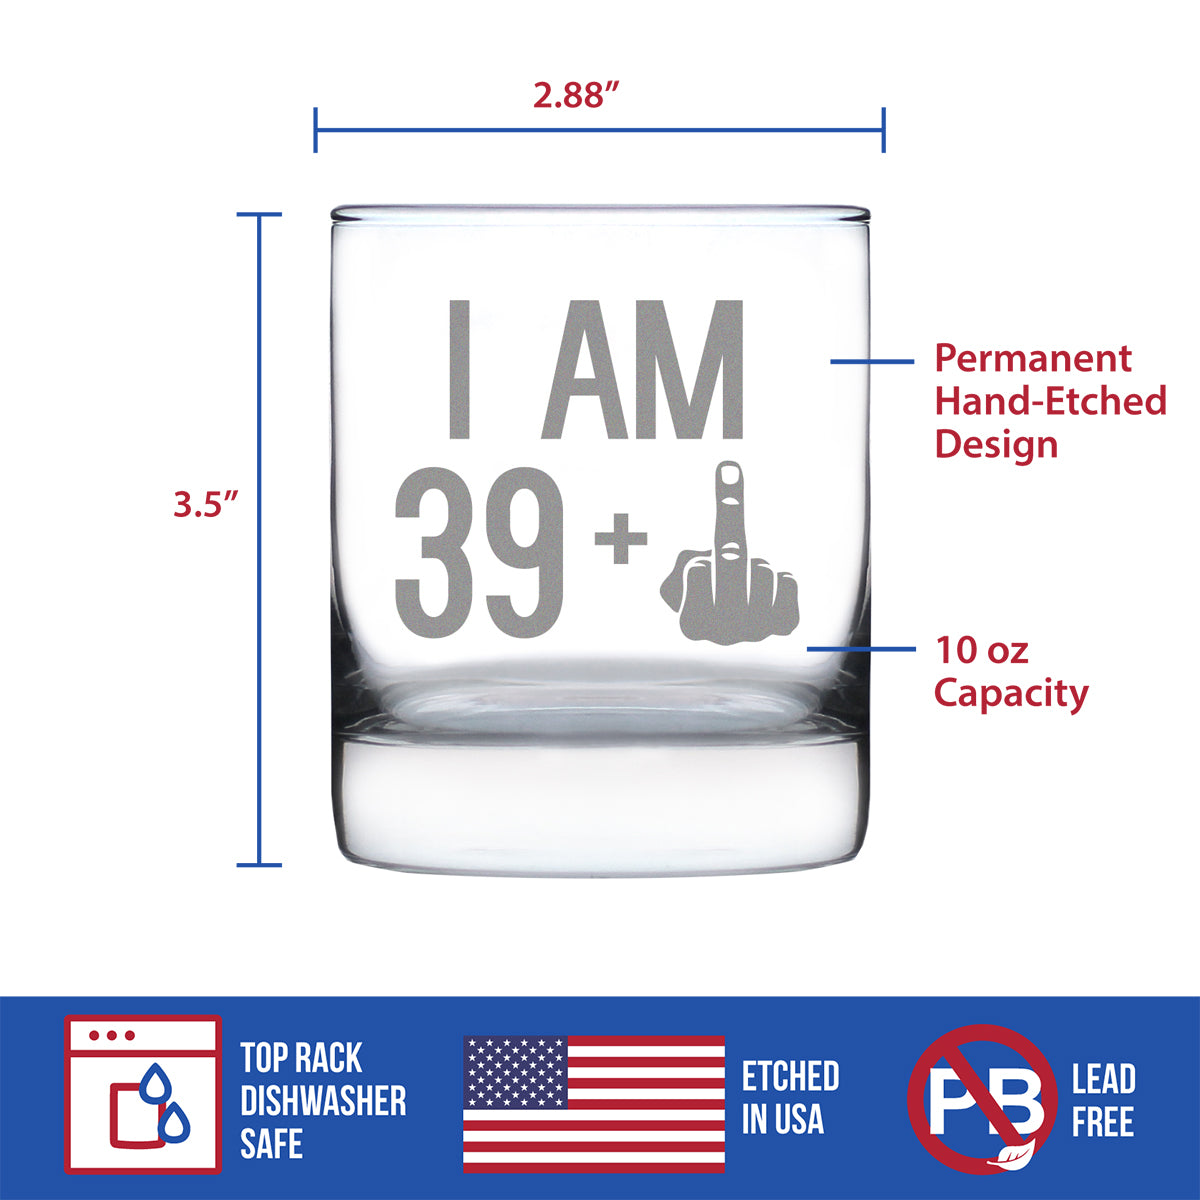 39 + 1 Middle Finger - Funny 40th Birthday Whiskey Rocks Glass Gifts for Men &amp; Women Turning 40 - Fun Whisky Drinking Tumbler